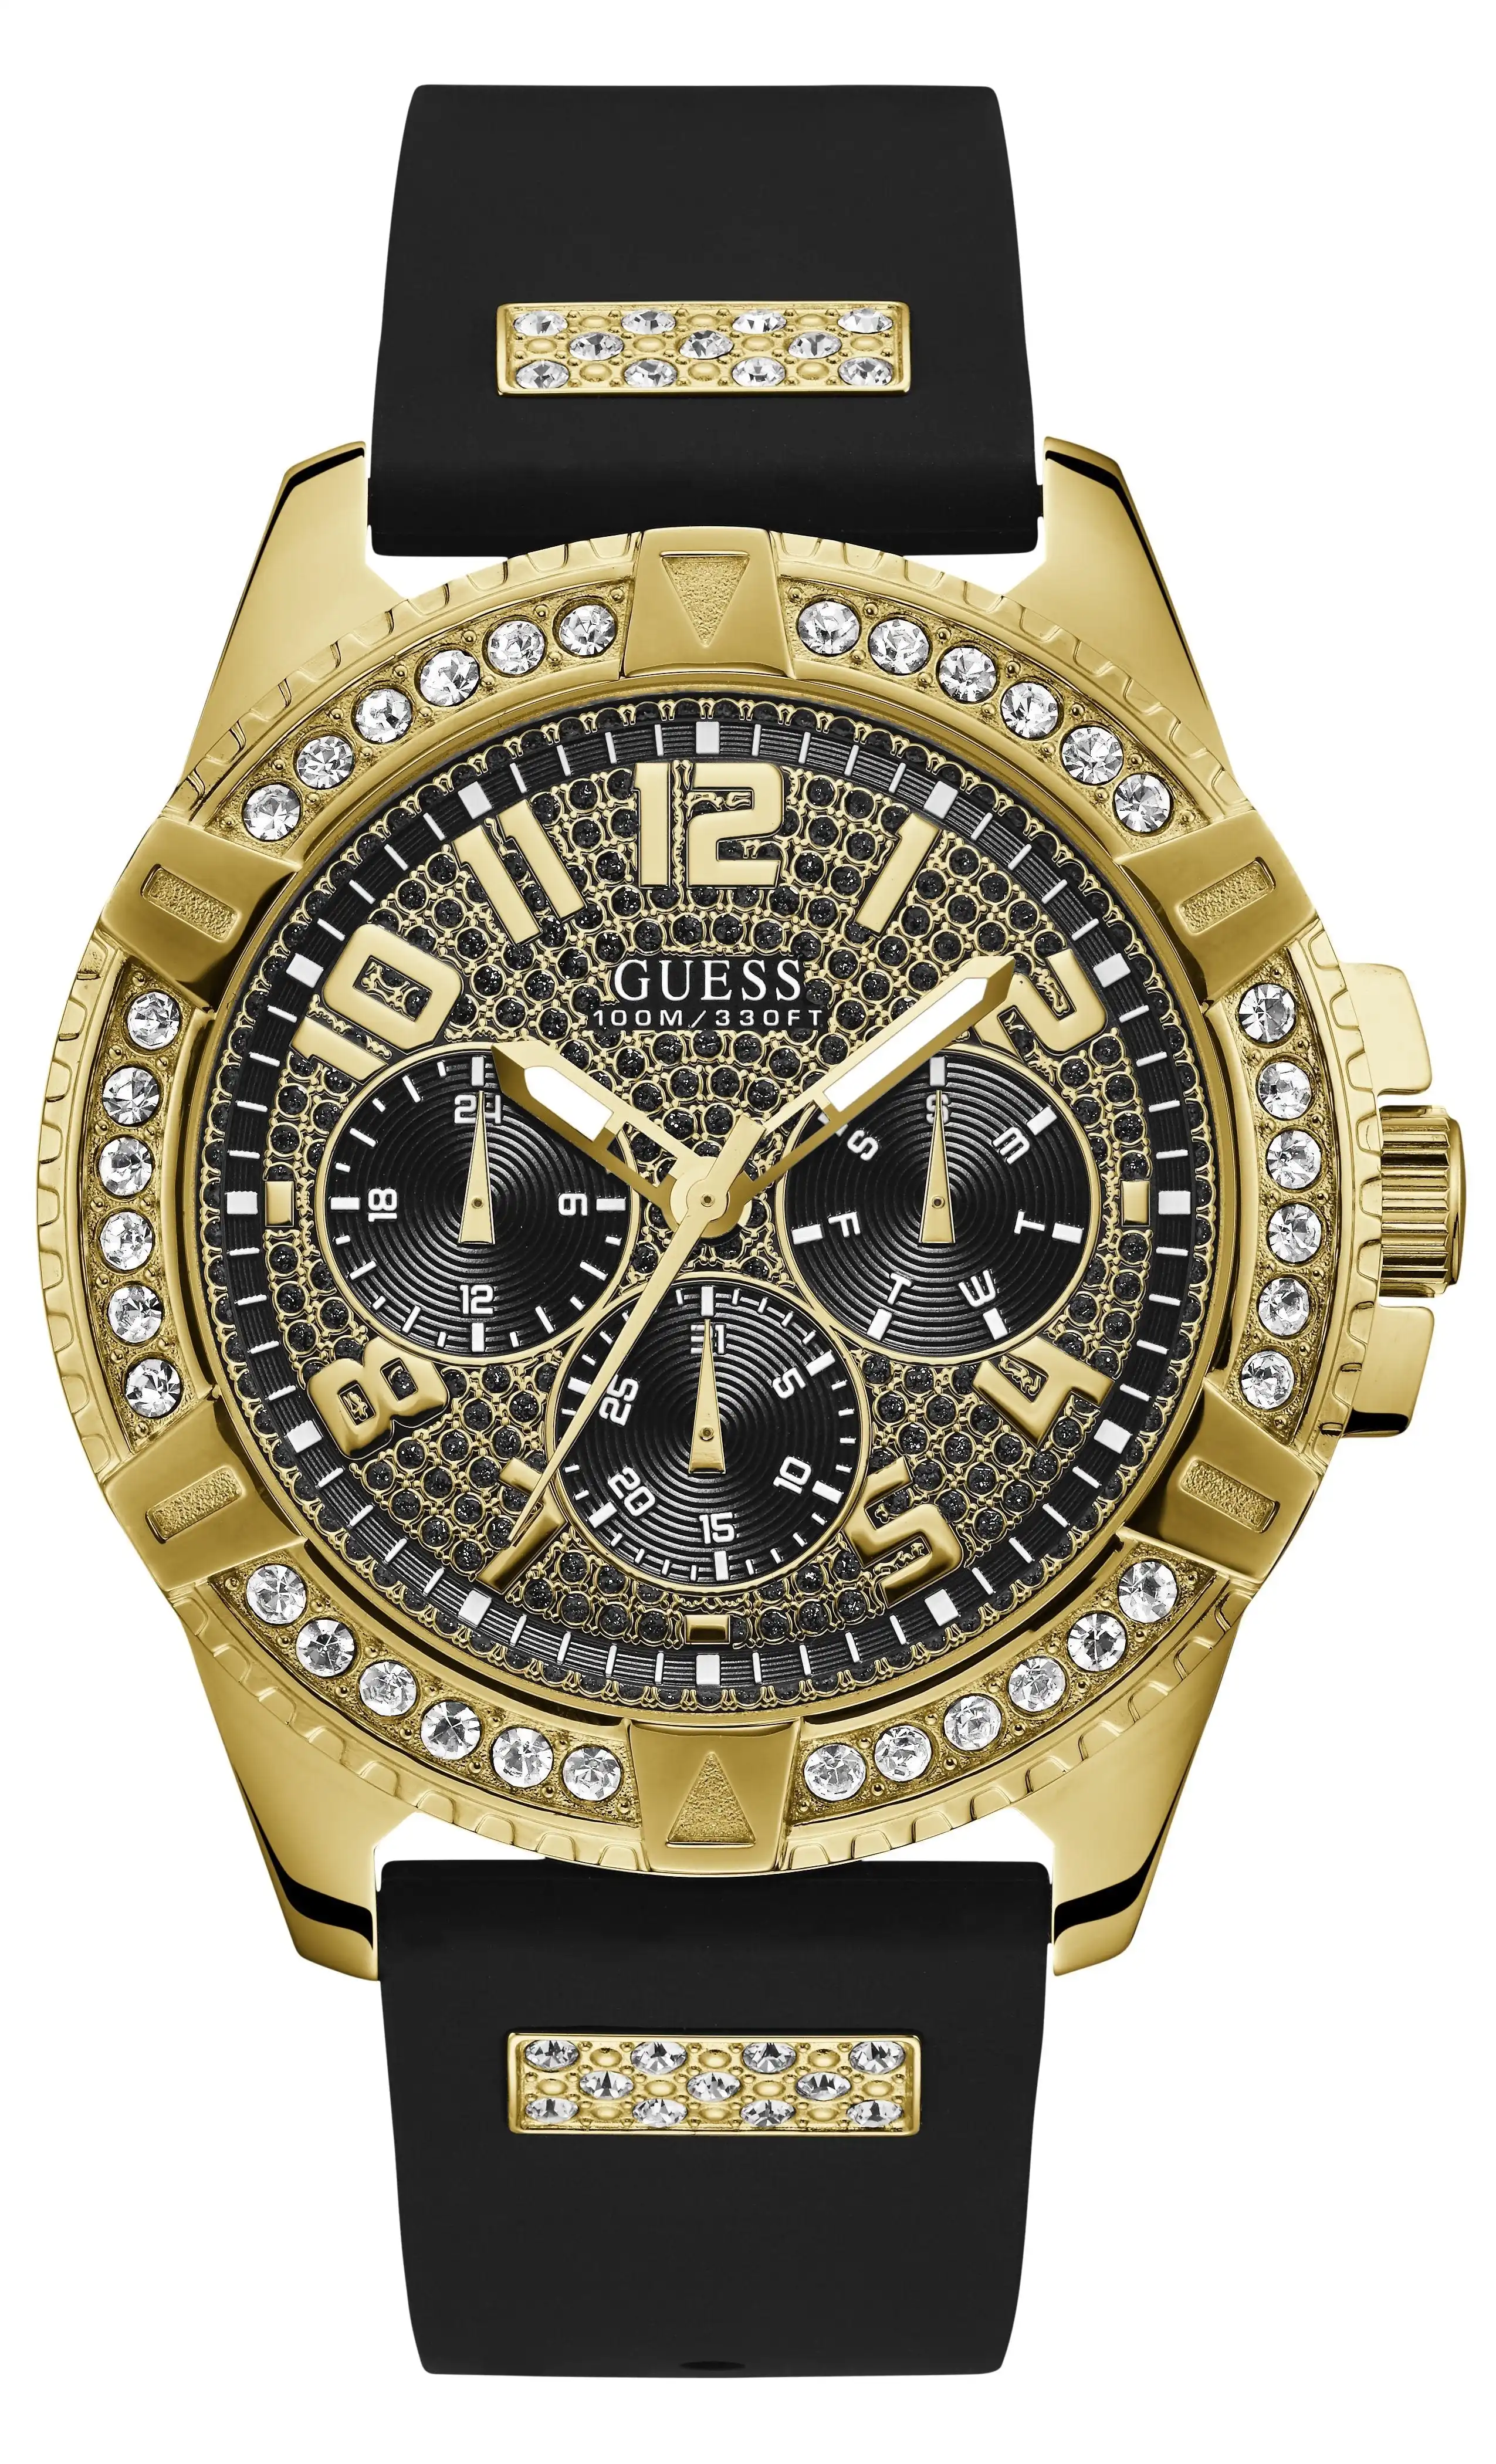 Guess Frontier Crystal Gold & Black Silicone Men's Watch W1132G1